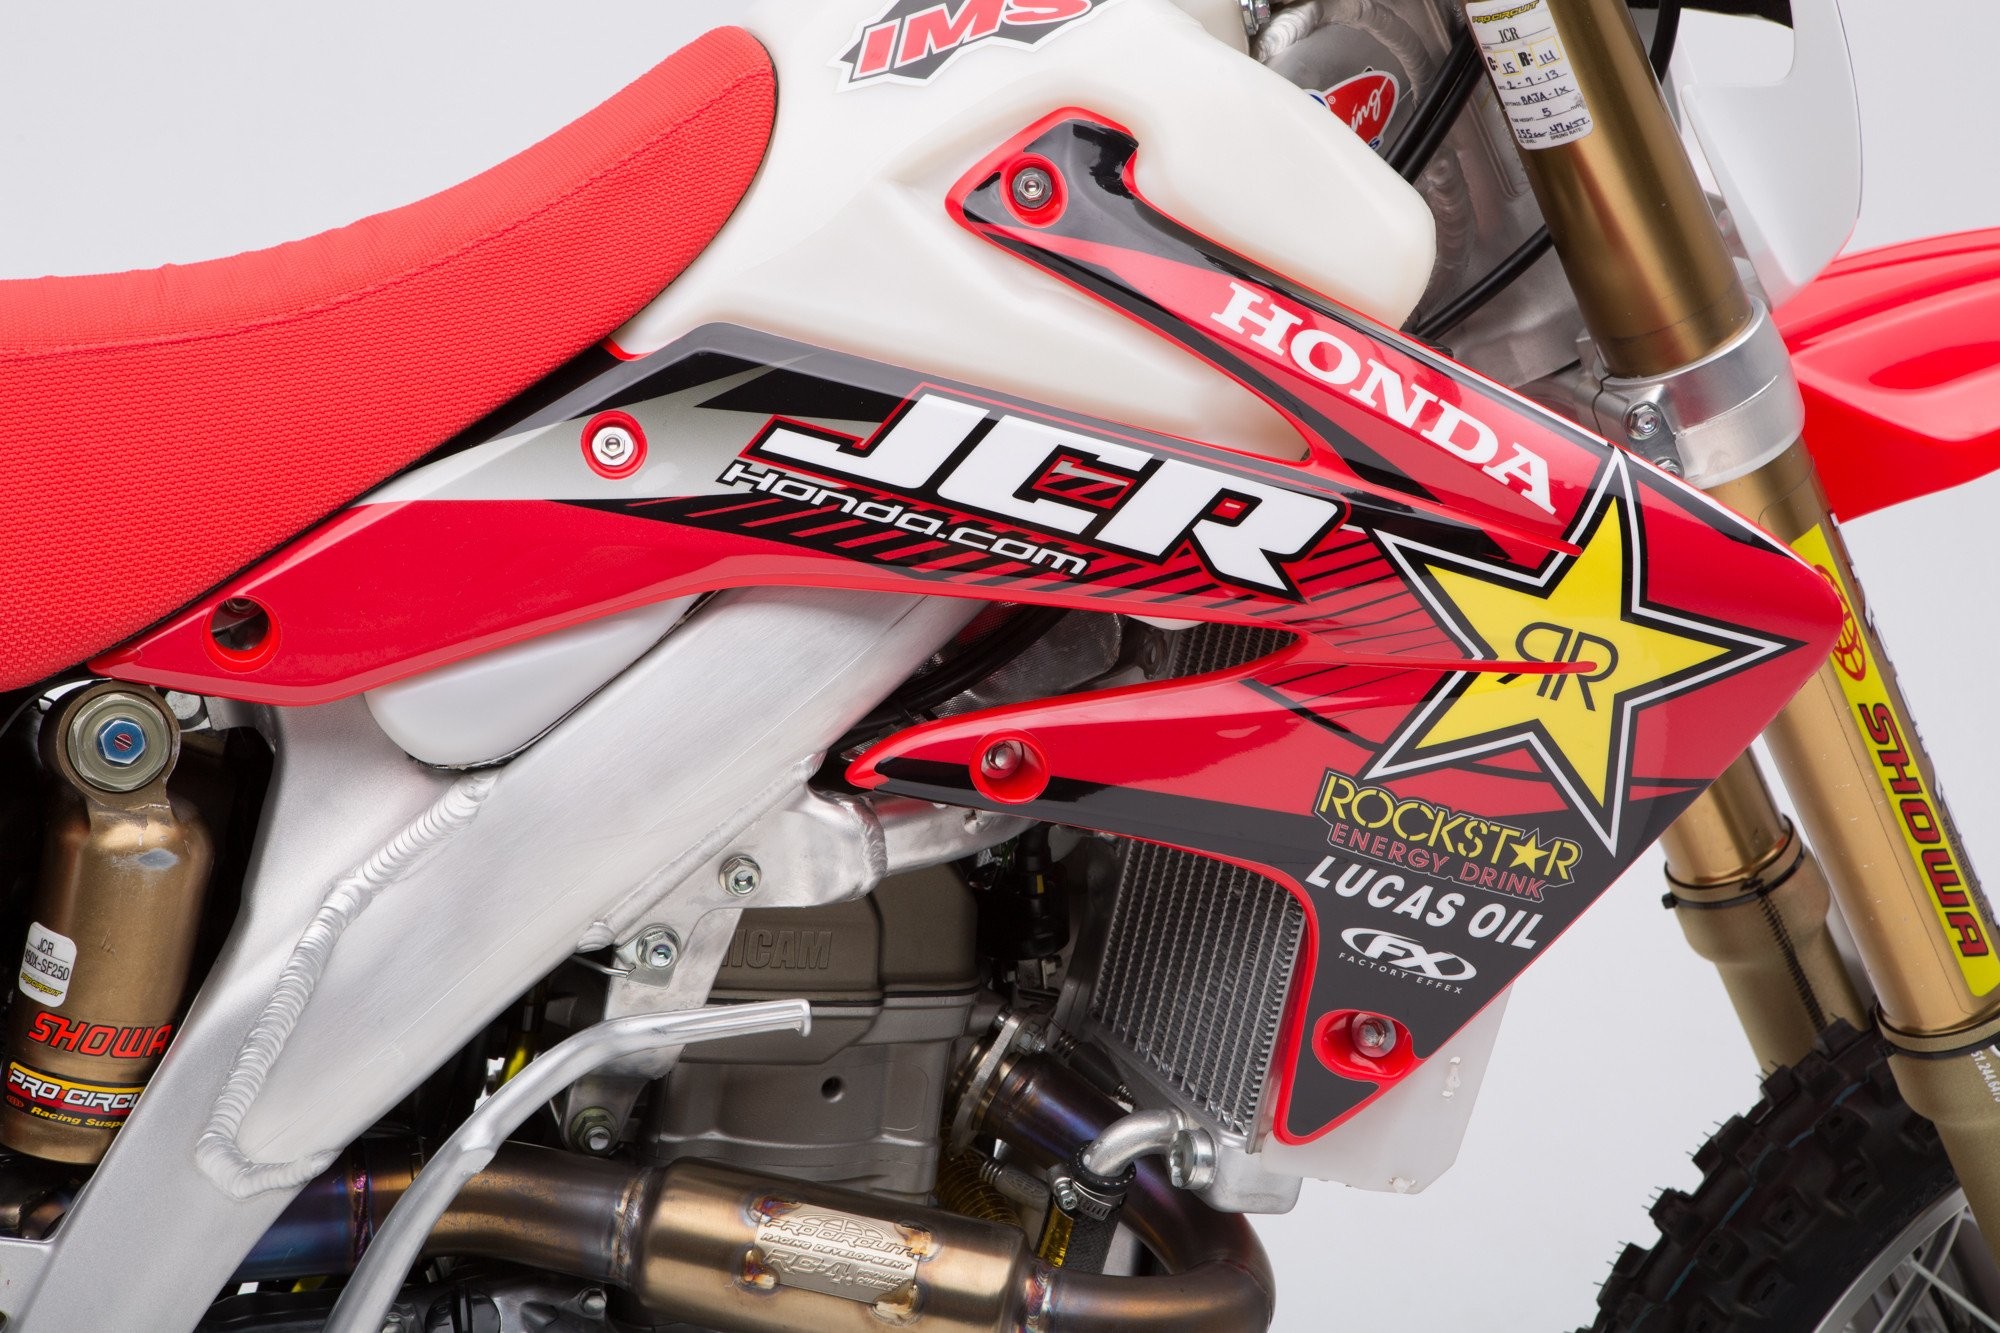 2000x1333 JCR Rockstar Graphic Kit with number plate backgrounds